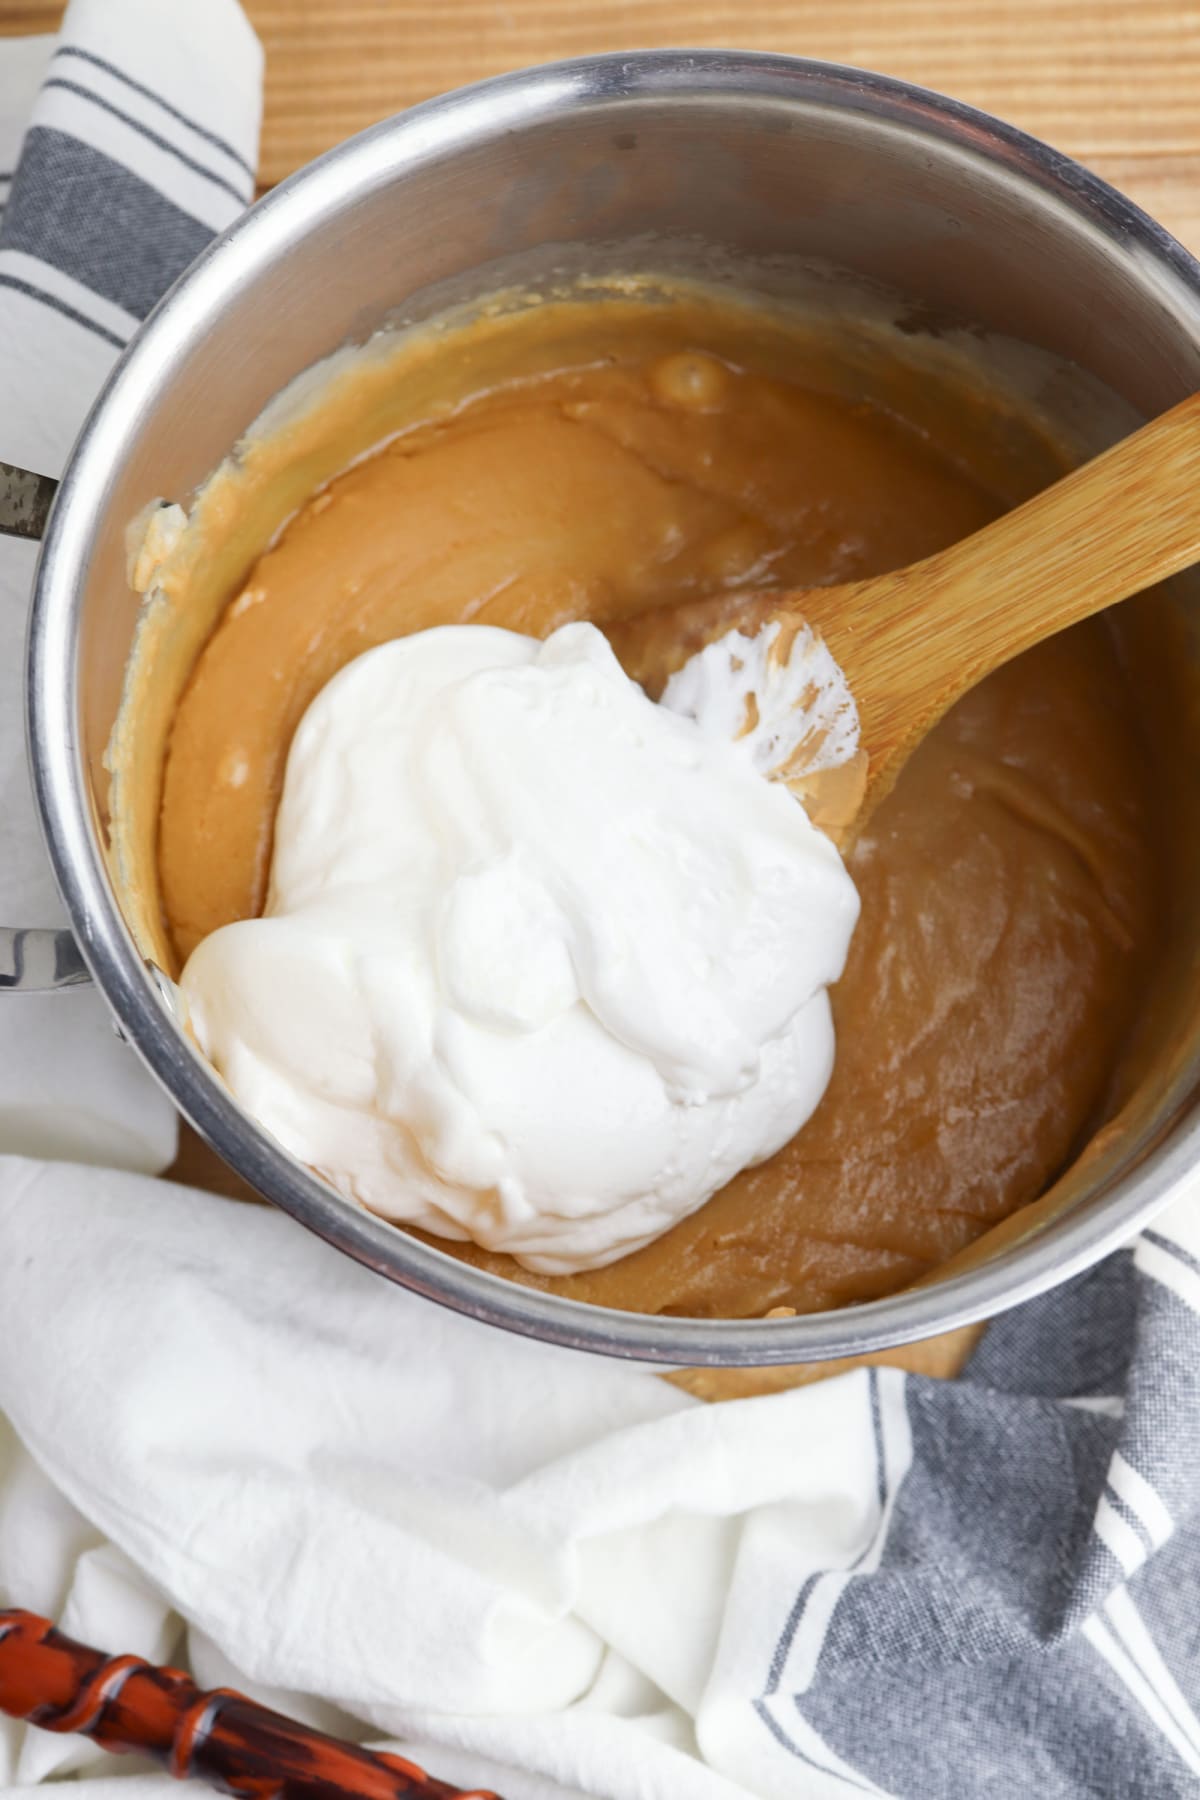 Marshmallow creme and rum extract in saucepan